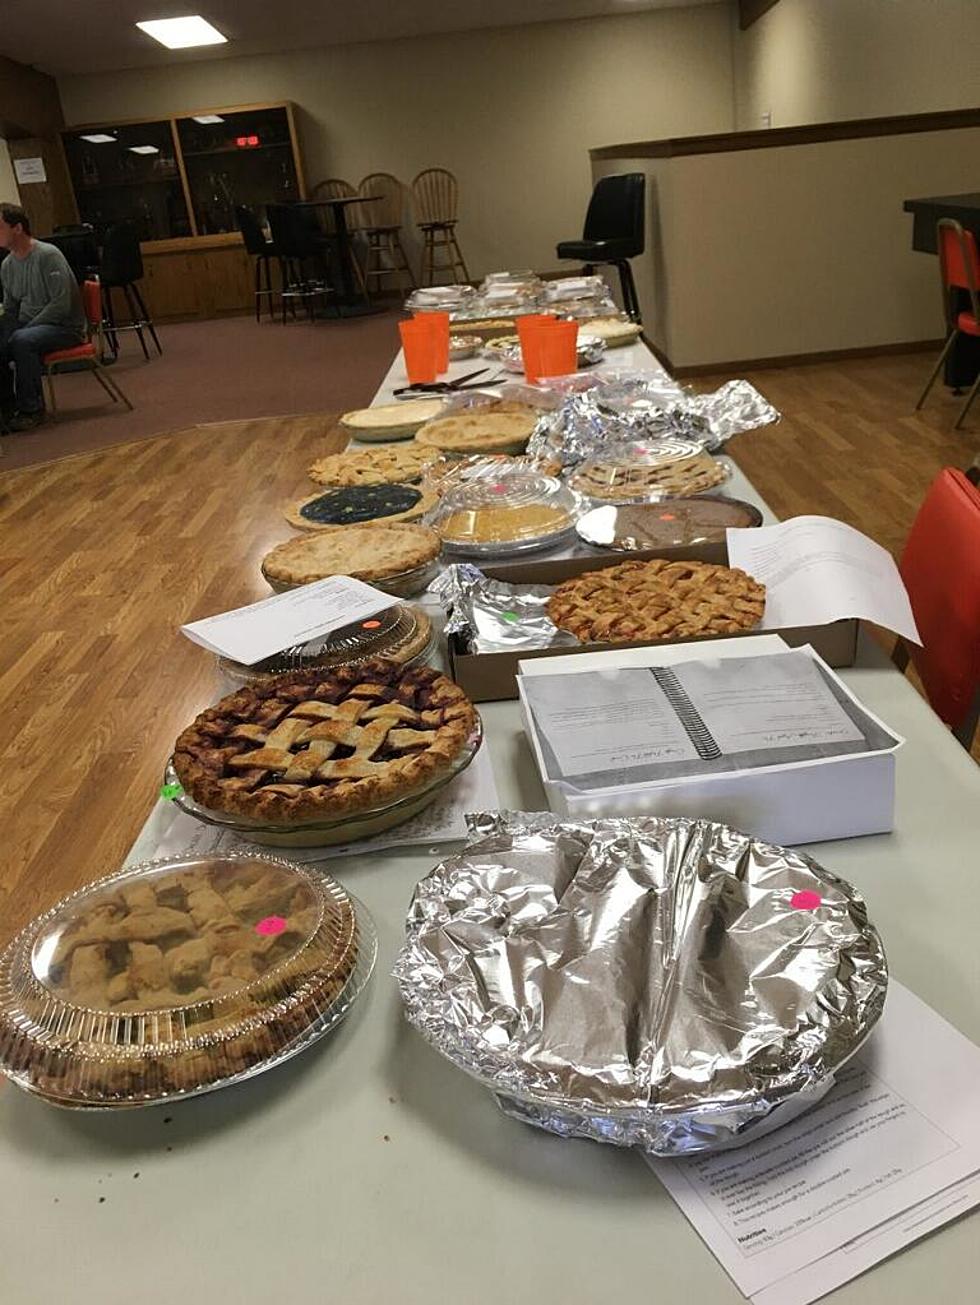 How Sweet It Is!  Over 40 Entries Submitted in UMVF Pie Baking Contest